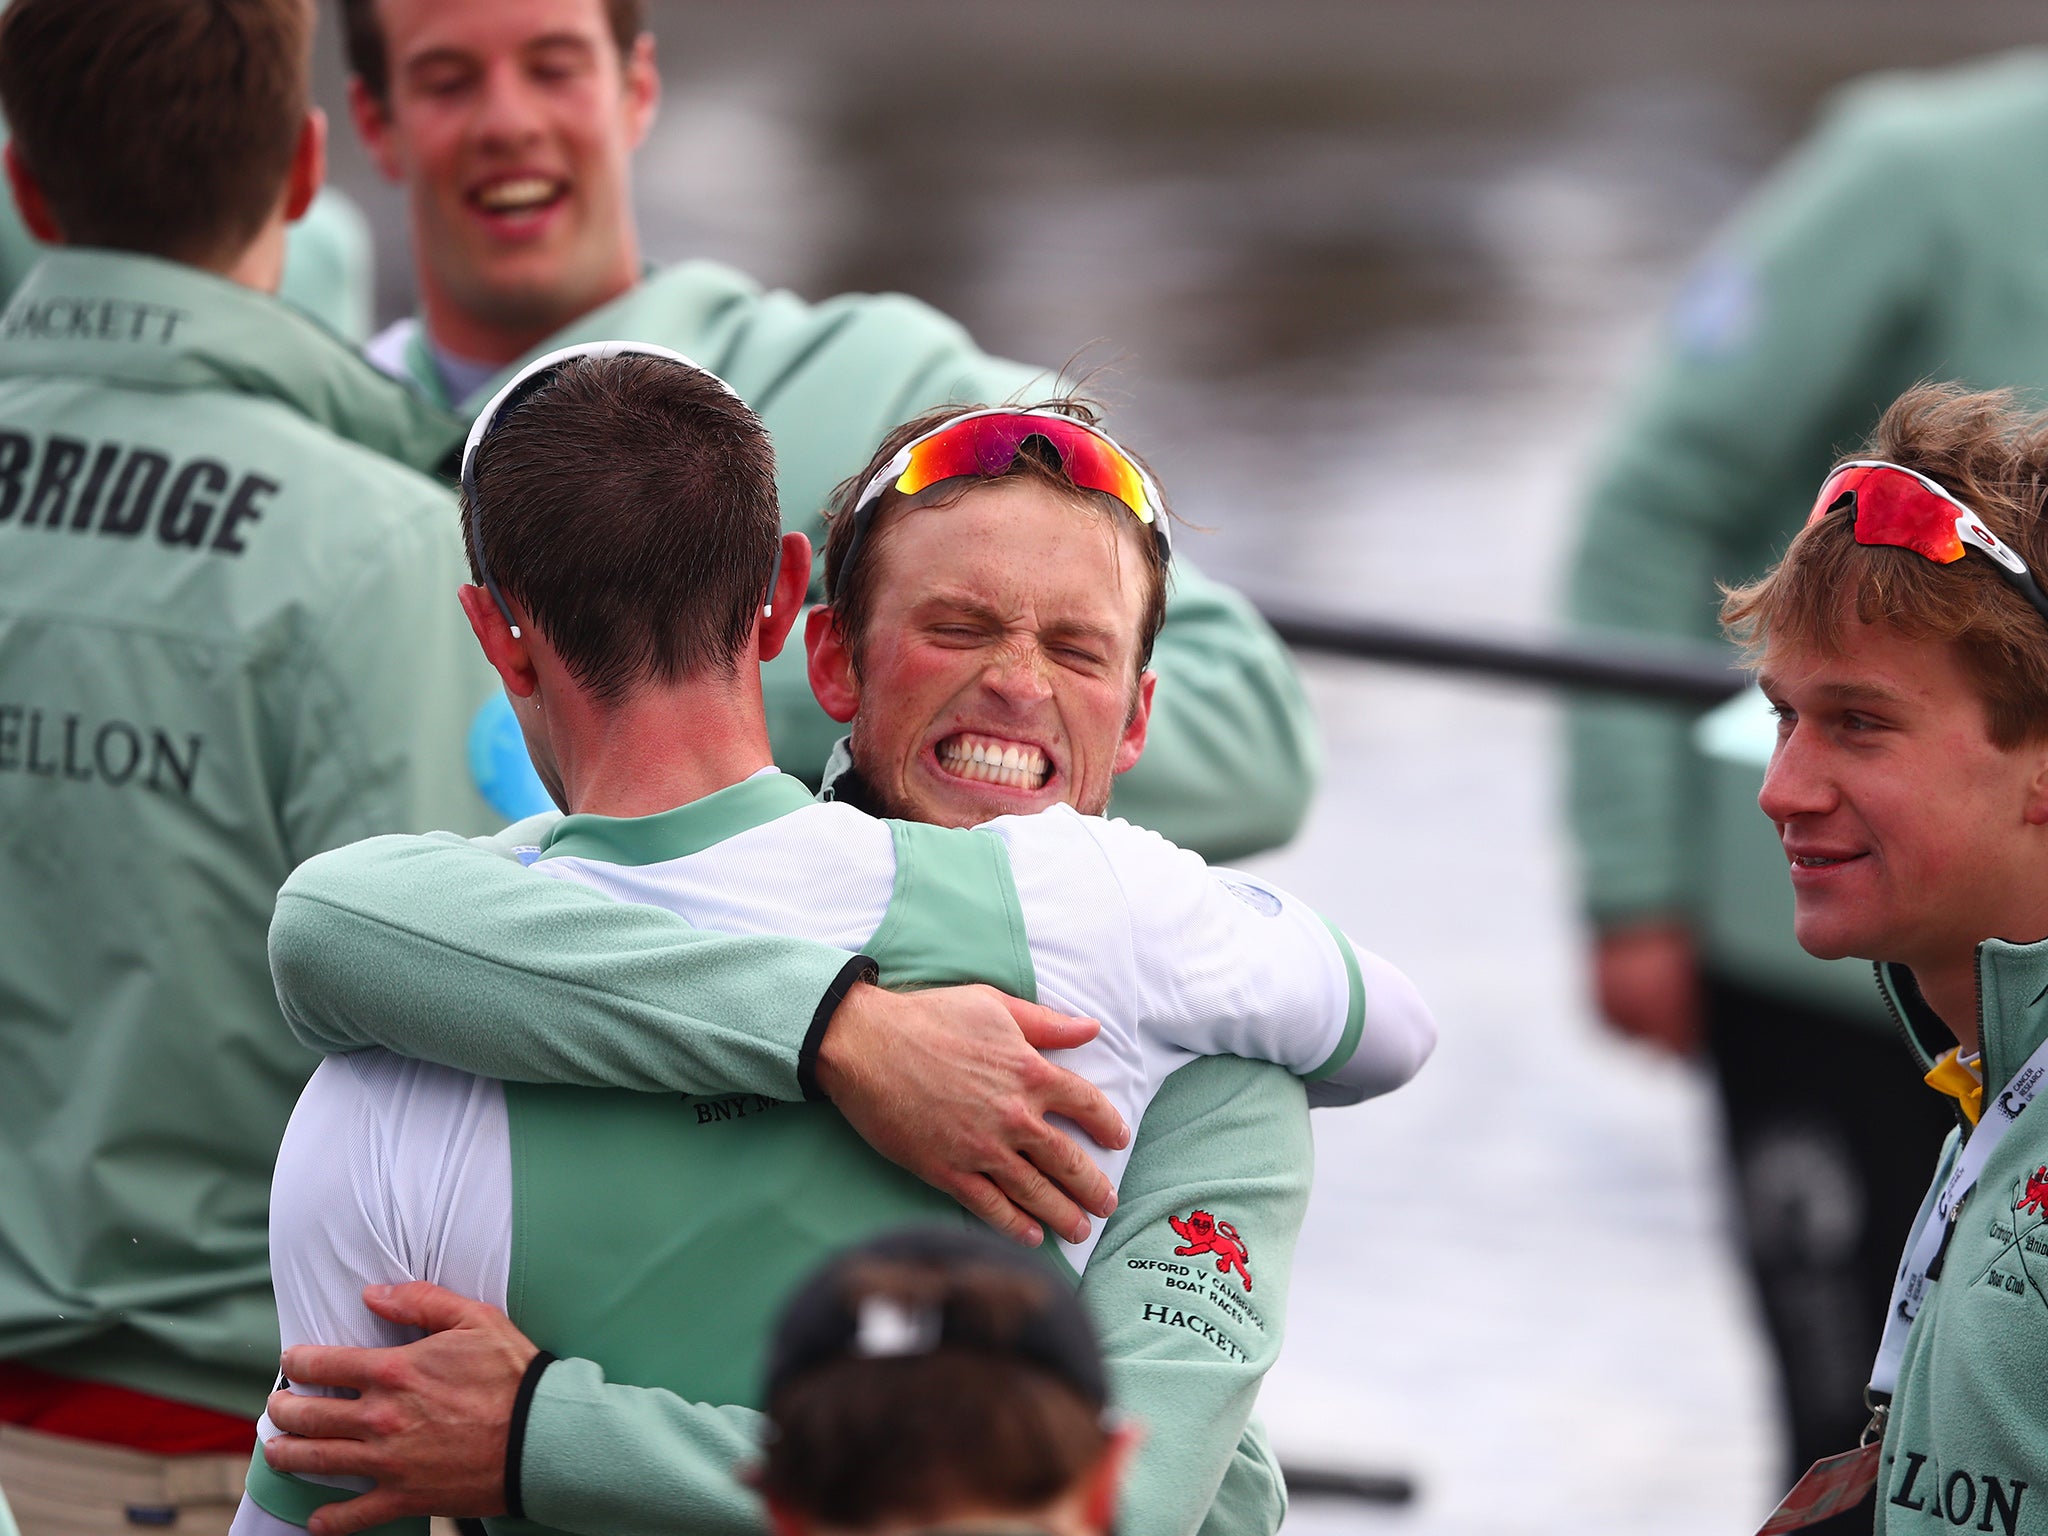 The Cambridge crew celebrate following their victory during The Cancer Research UK Boat Race